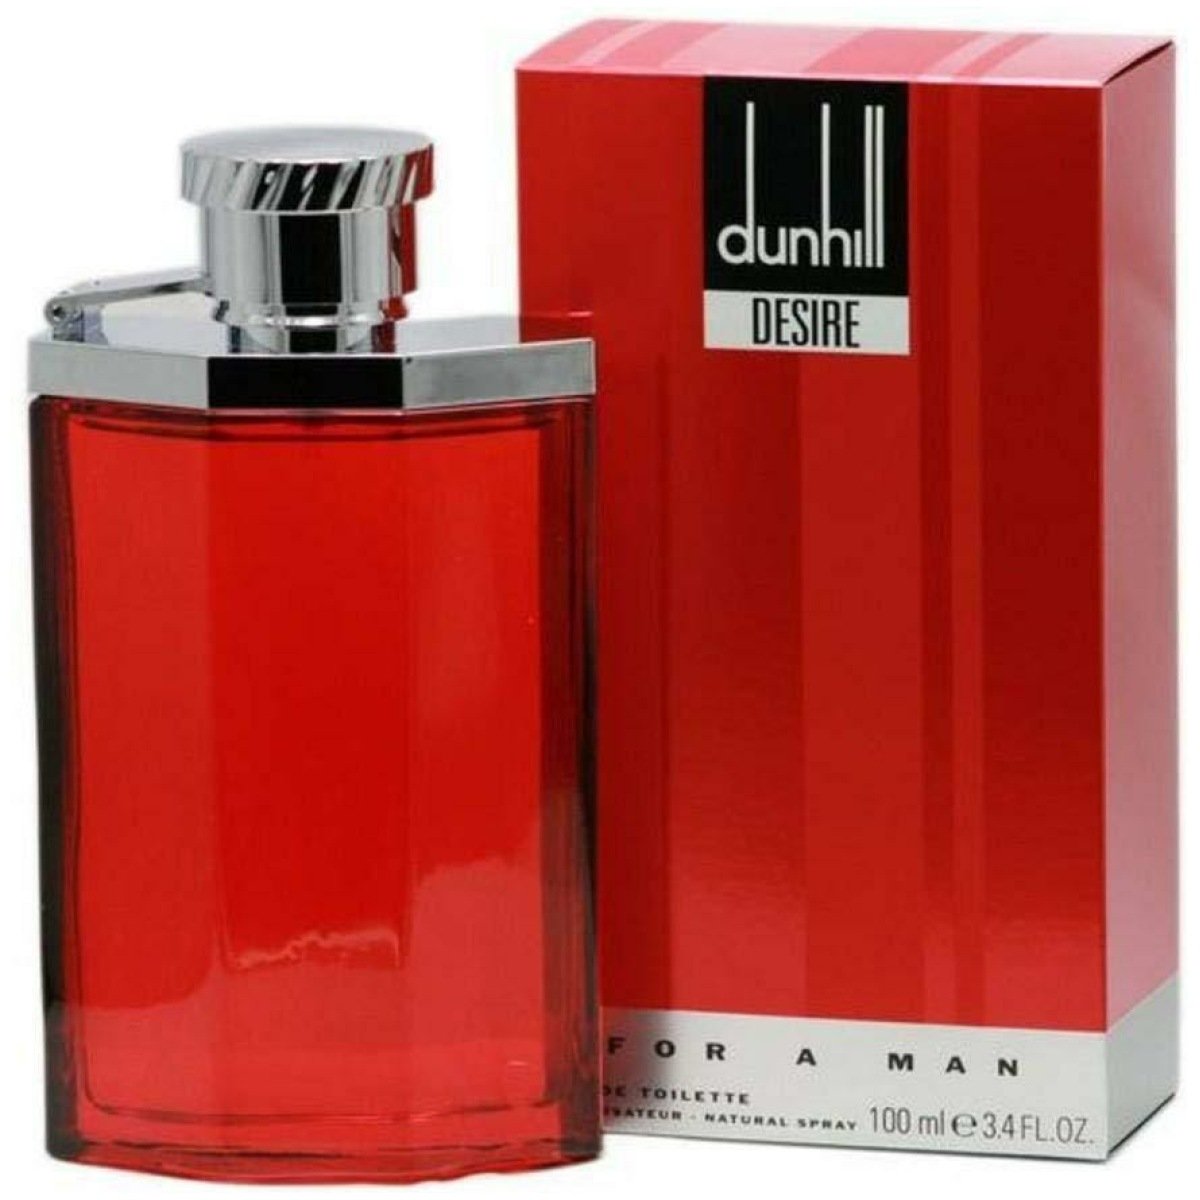 Dunhill Desire Red EDT Perfume For Men 100 ml